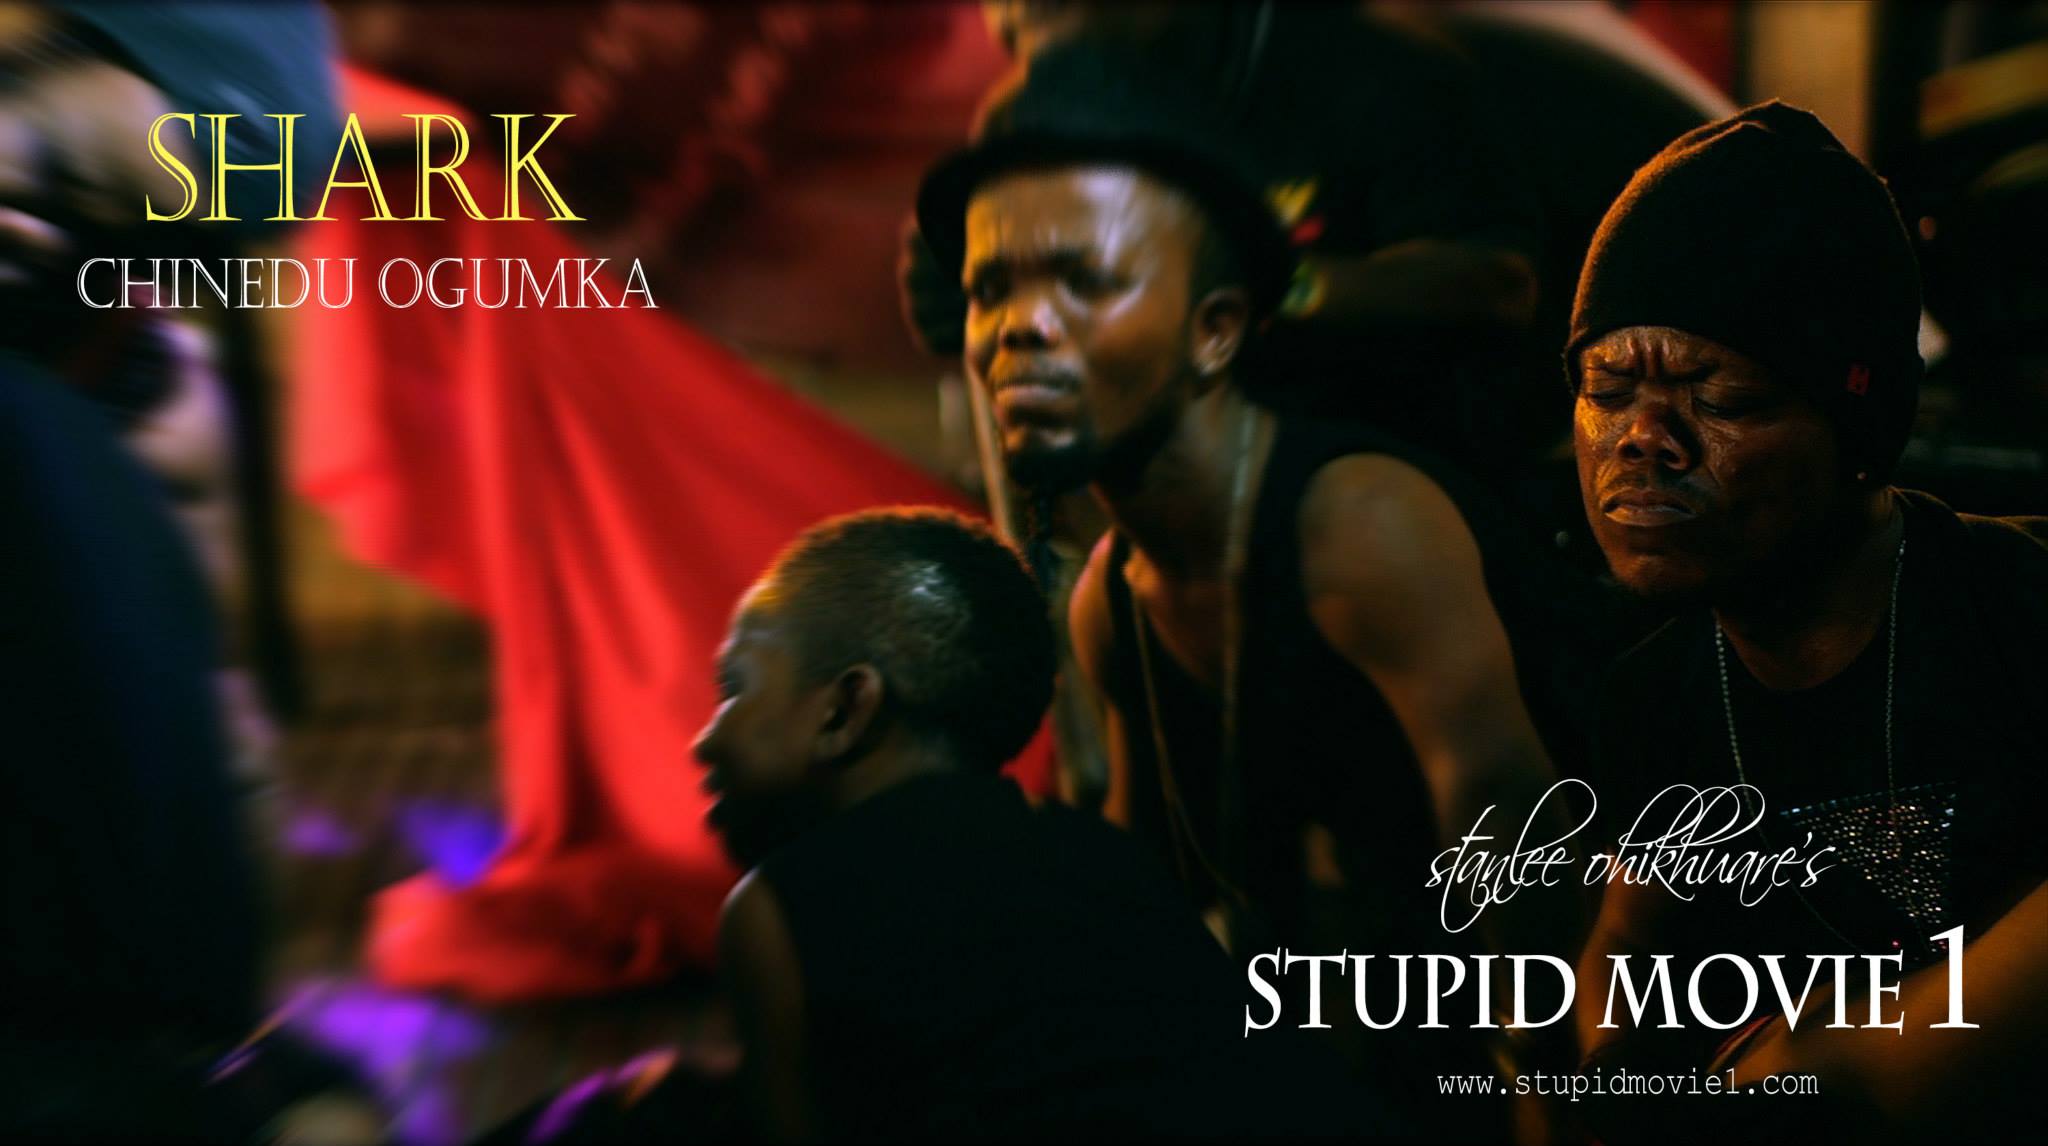 CHARACTER POSTER (SHARK) for Stanlee Ohikhuare's STUPID MOVIE 1